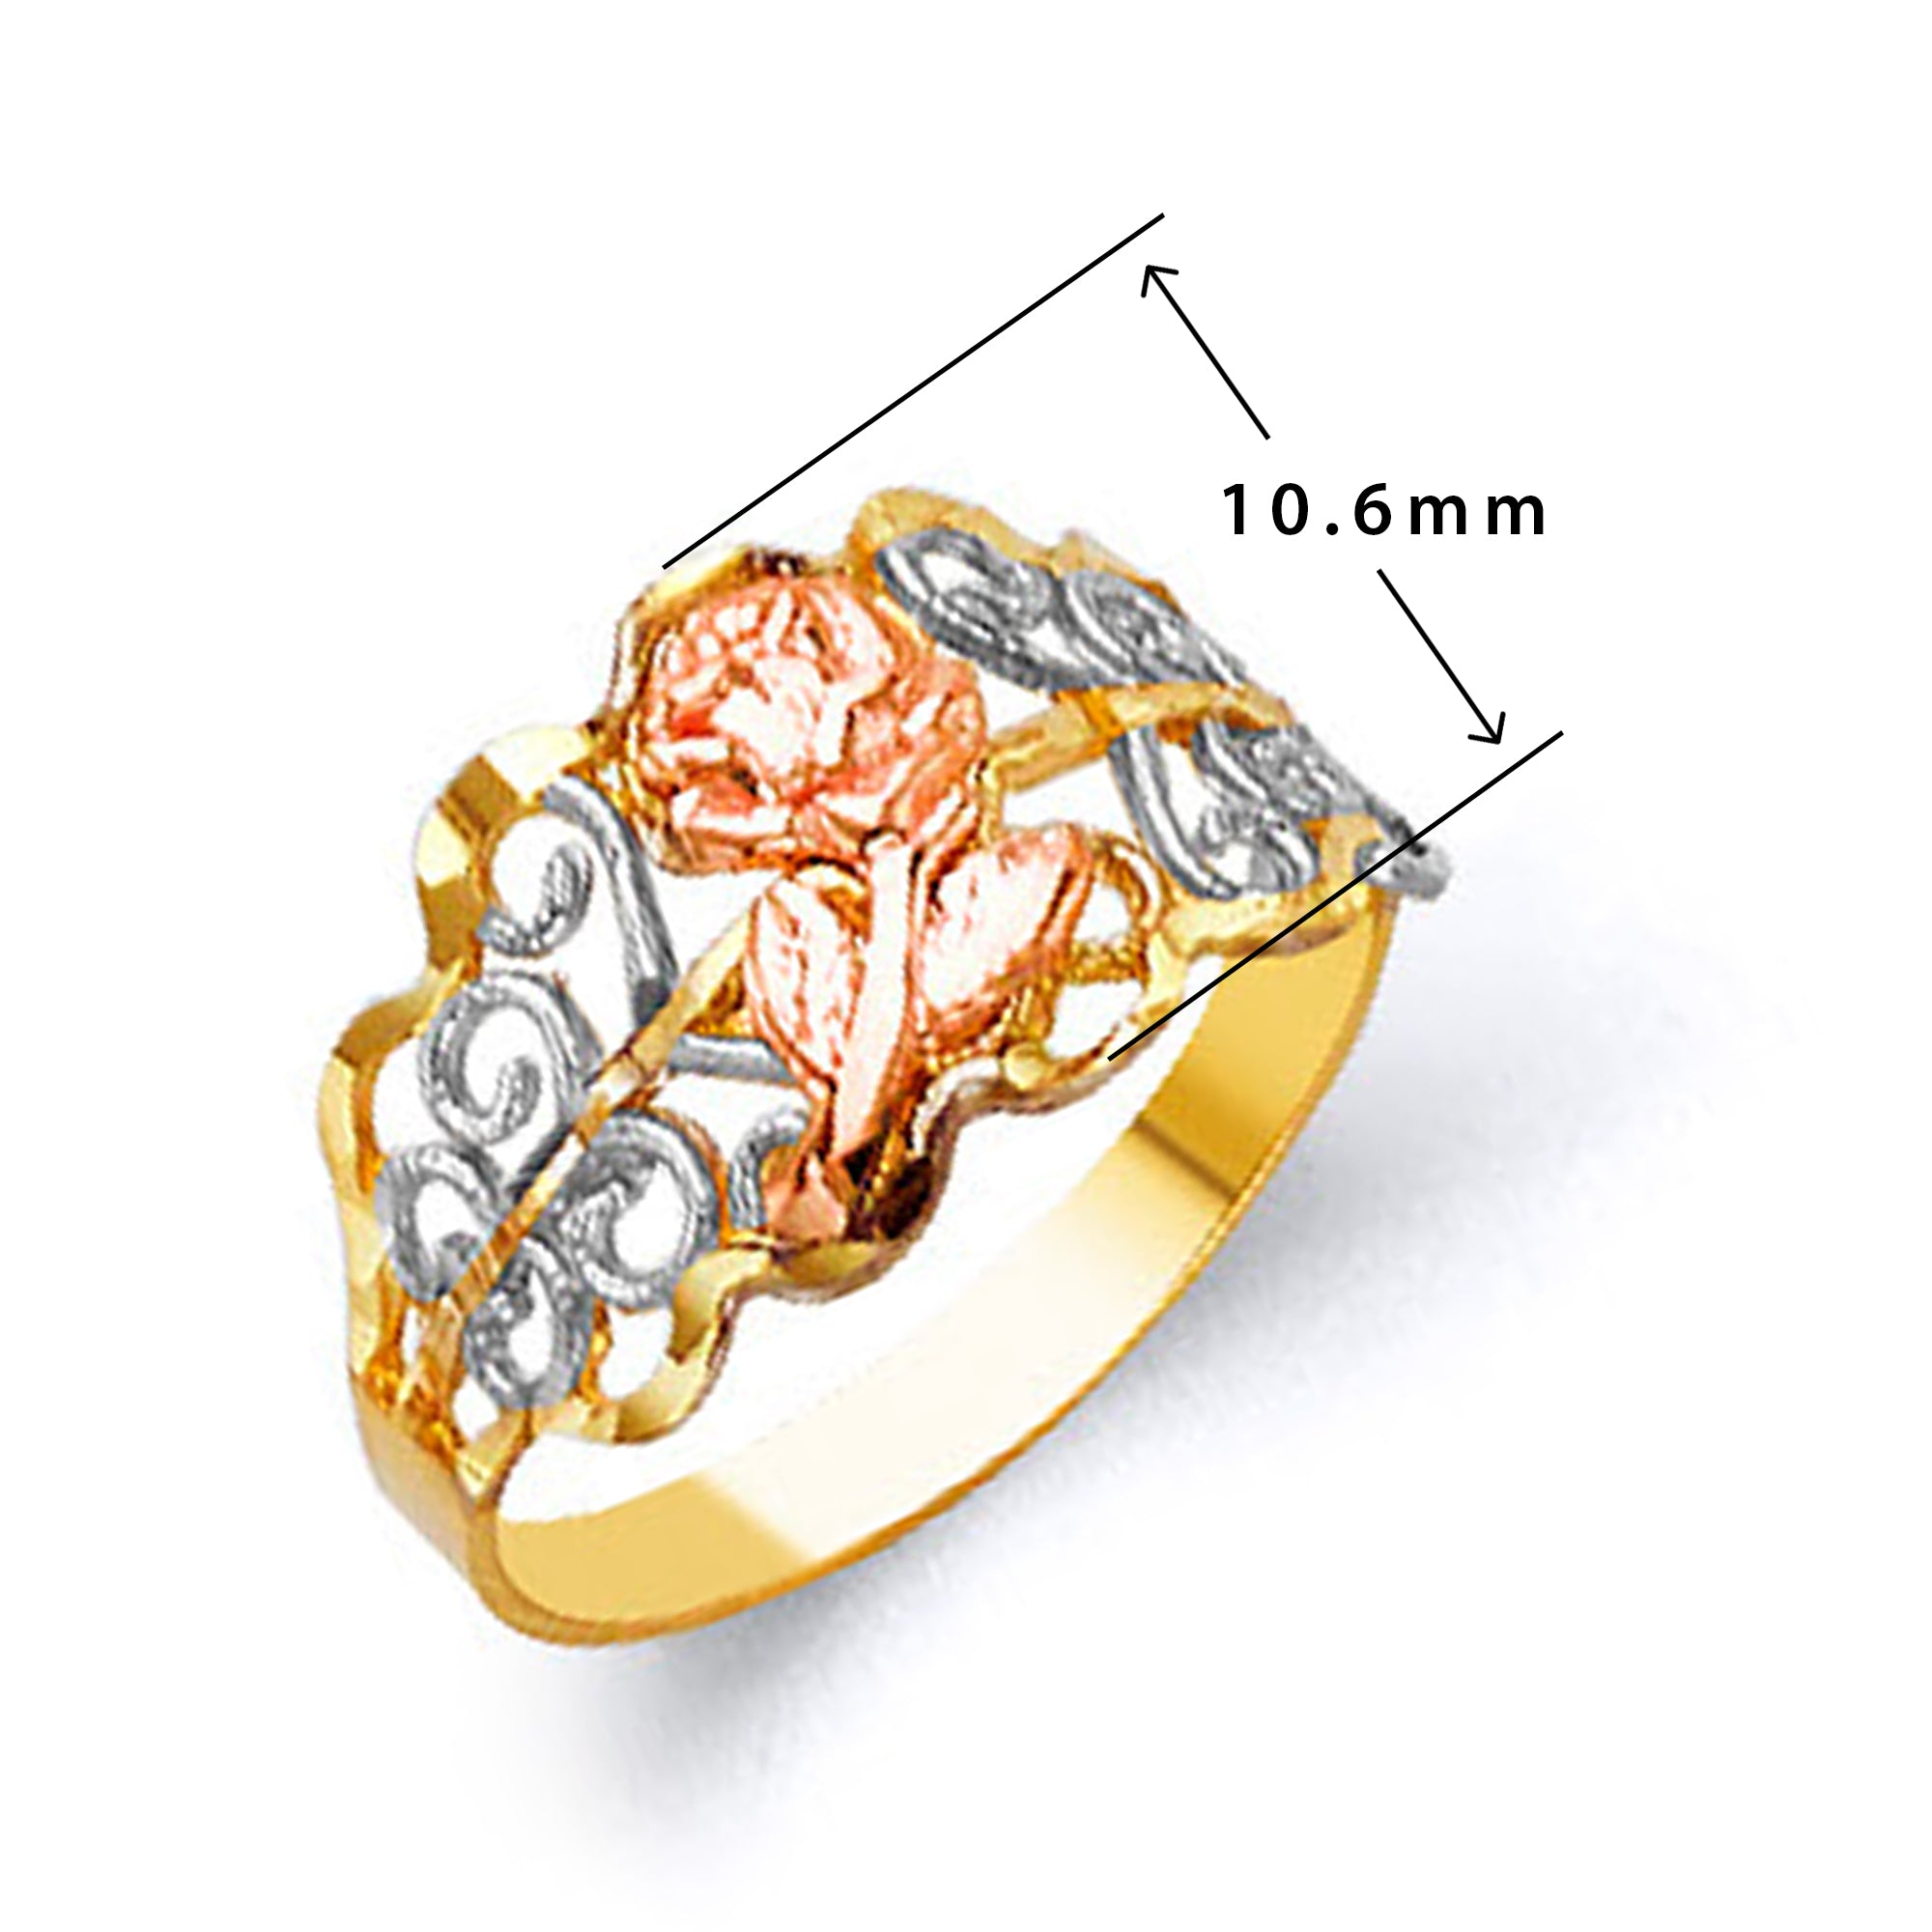 Tricolor Floral Patterned Ring in Solid Gold with Measurement